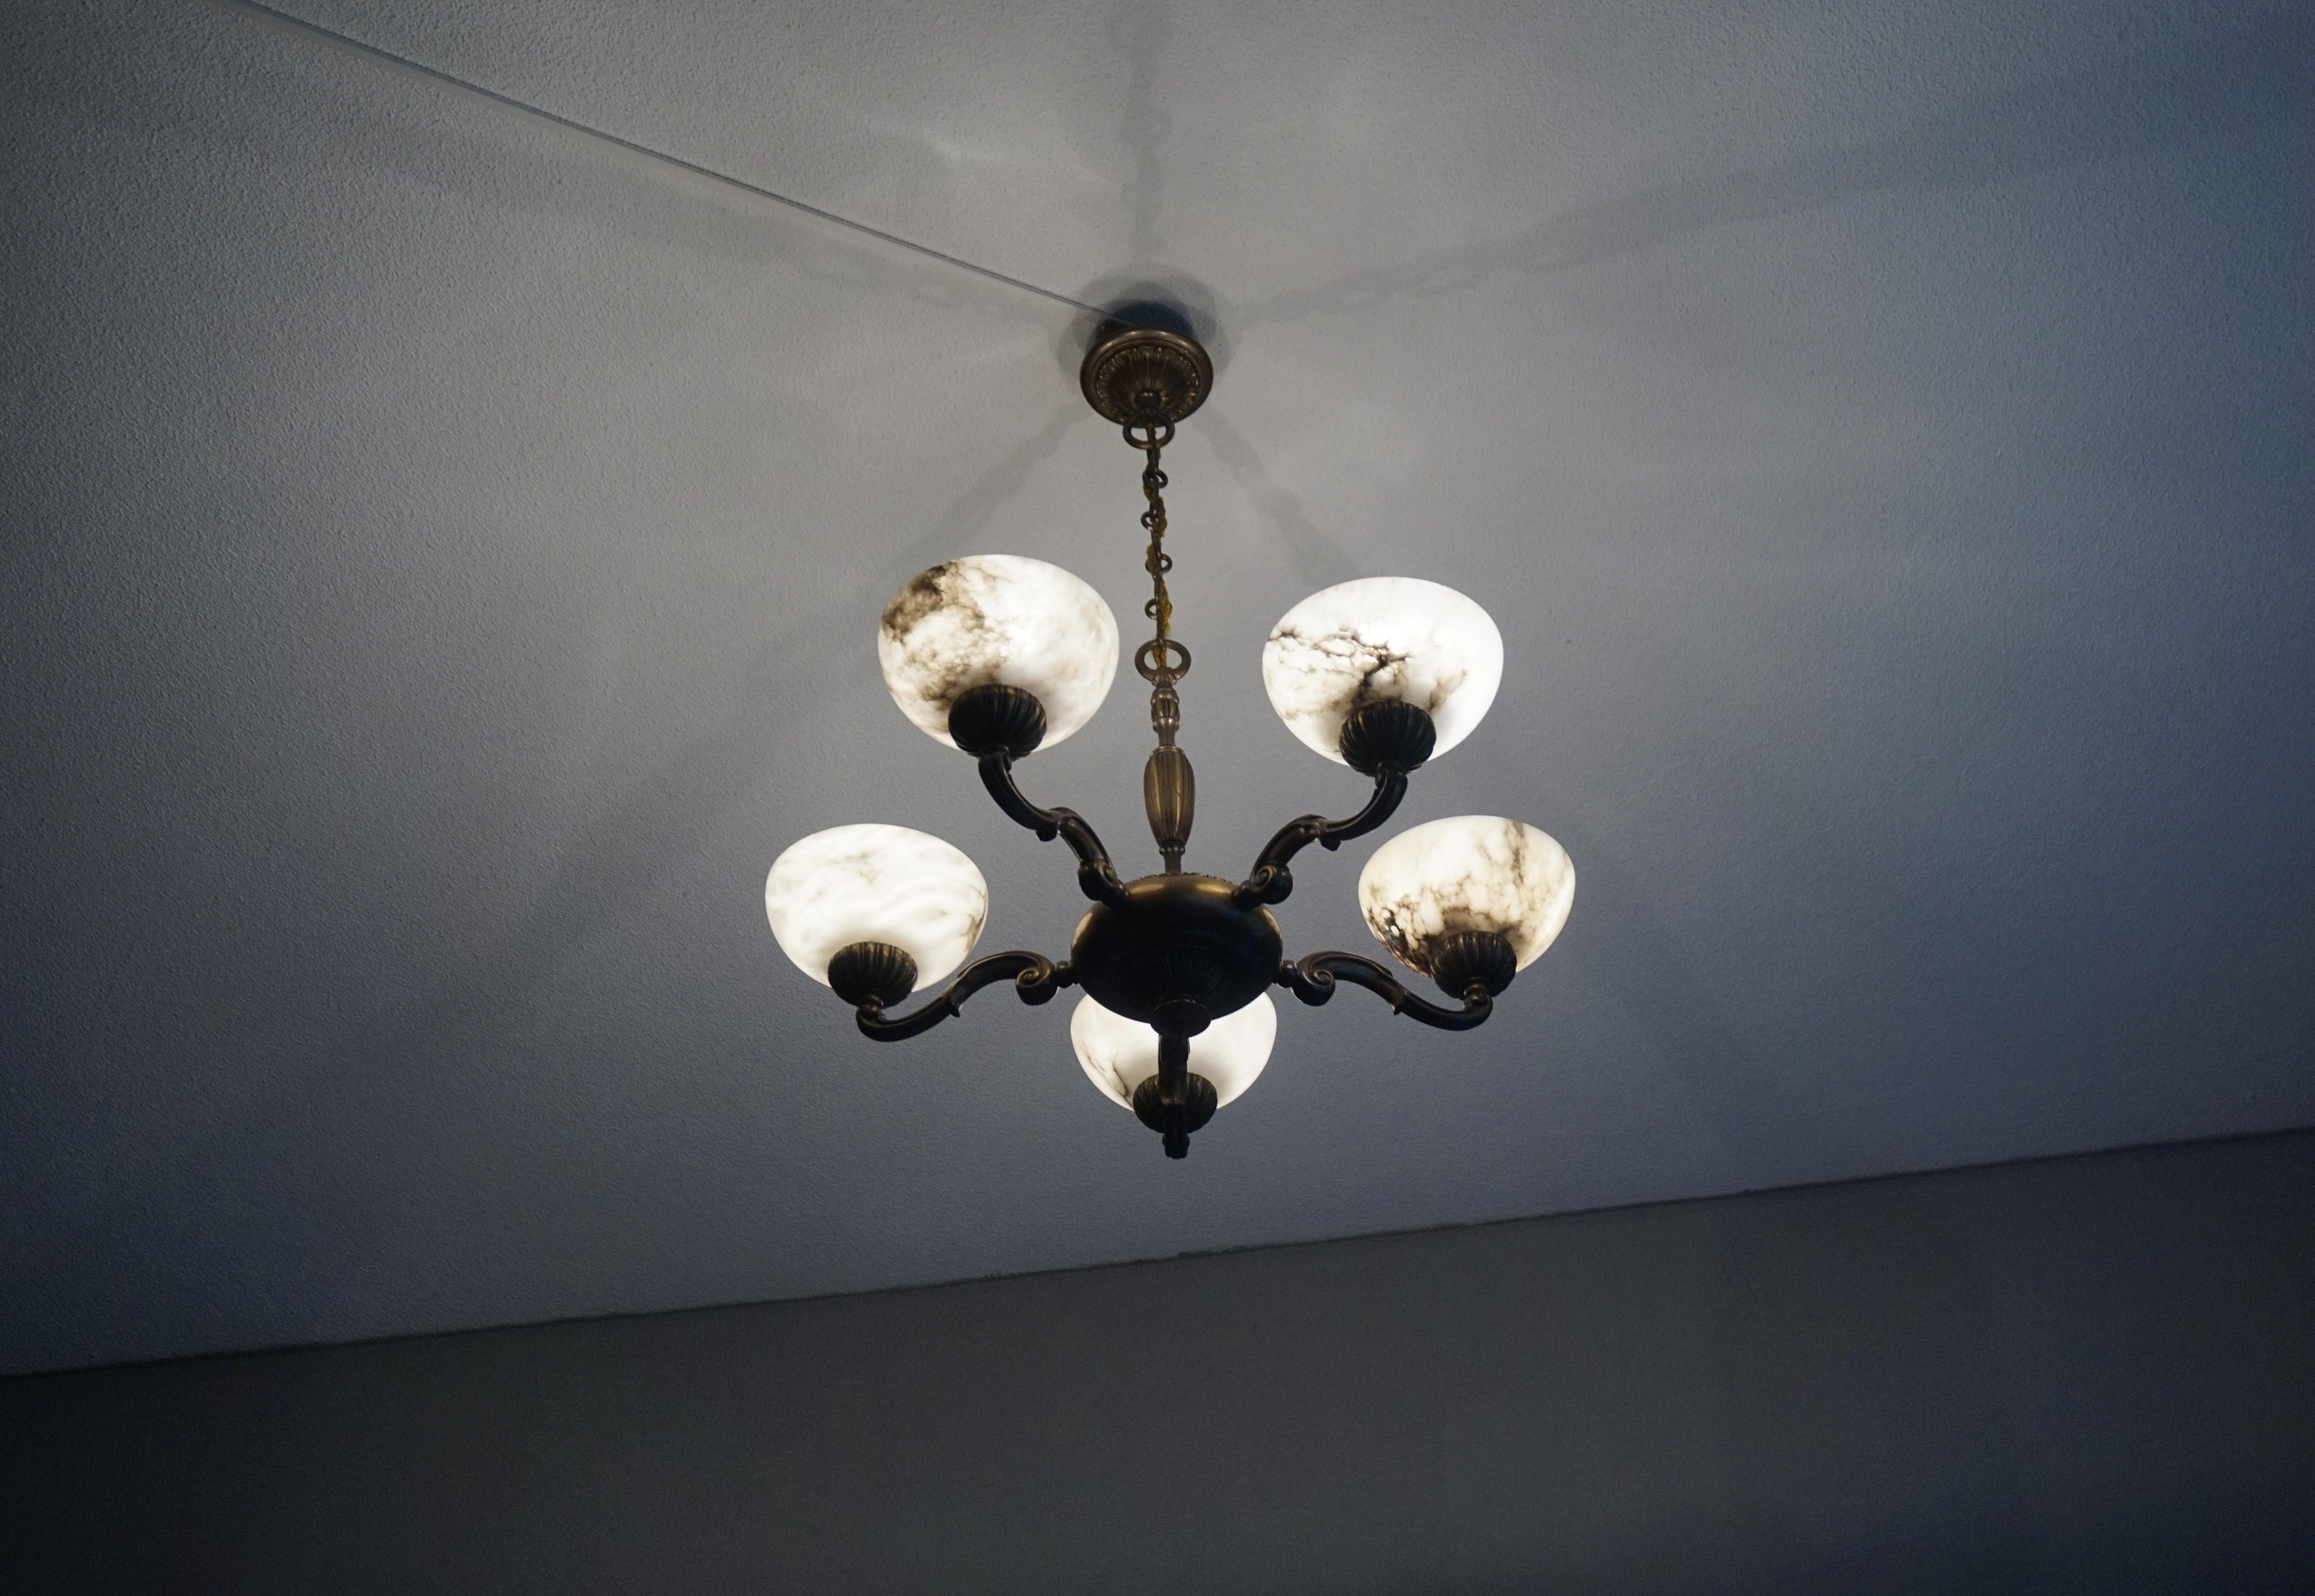 Small size and great looking brass and alabaster chandelier.

This here small size chandelier is another one of our recent great finds. If you are looking for a modest size alabaster light fixture, but you do want it to radiate more light than your